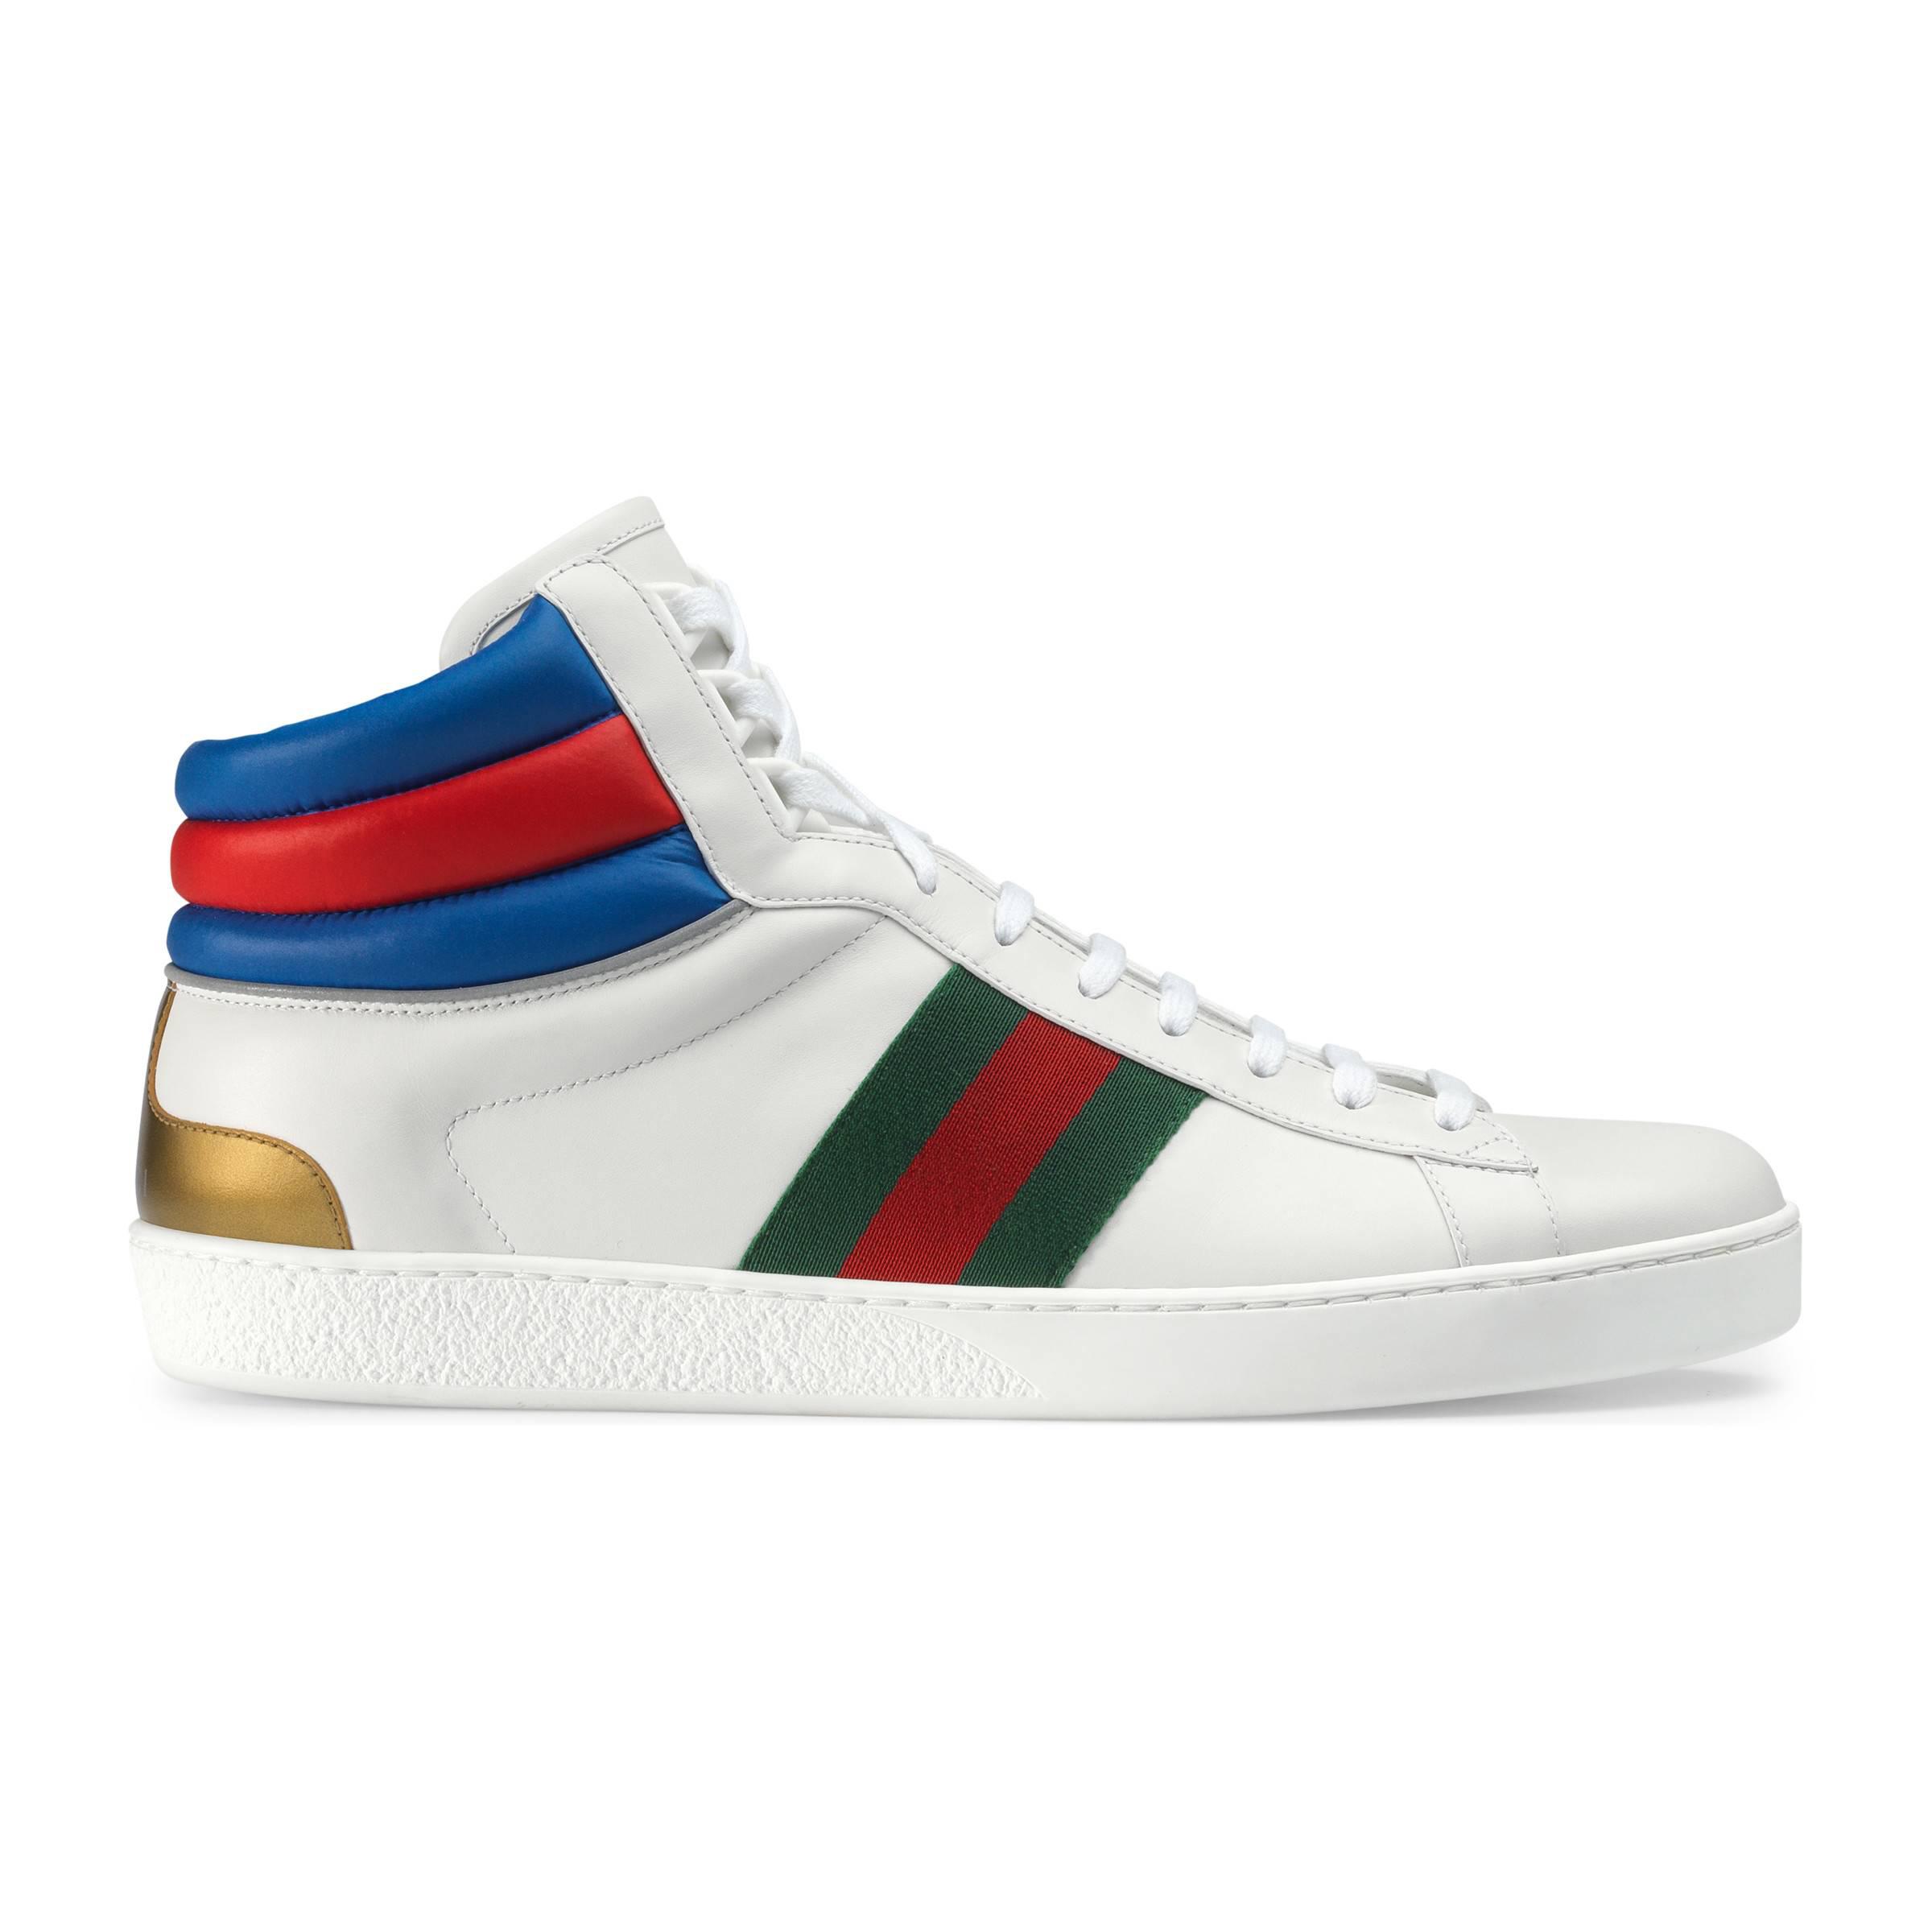 Gucci Ace High-top Sneaker in White Leather (White) for Men - Lyst